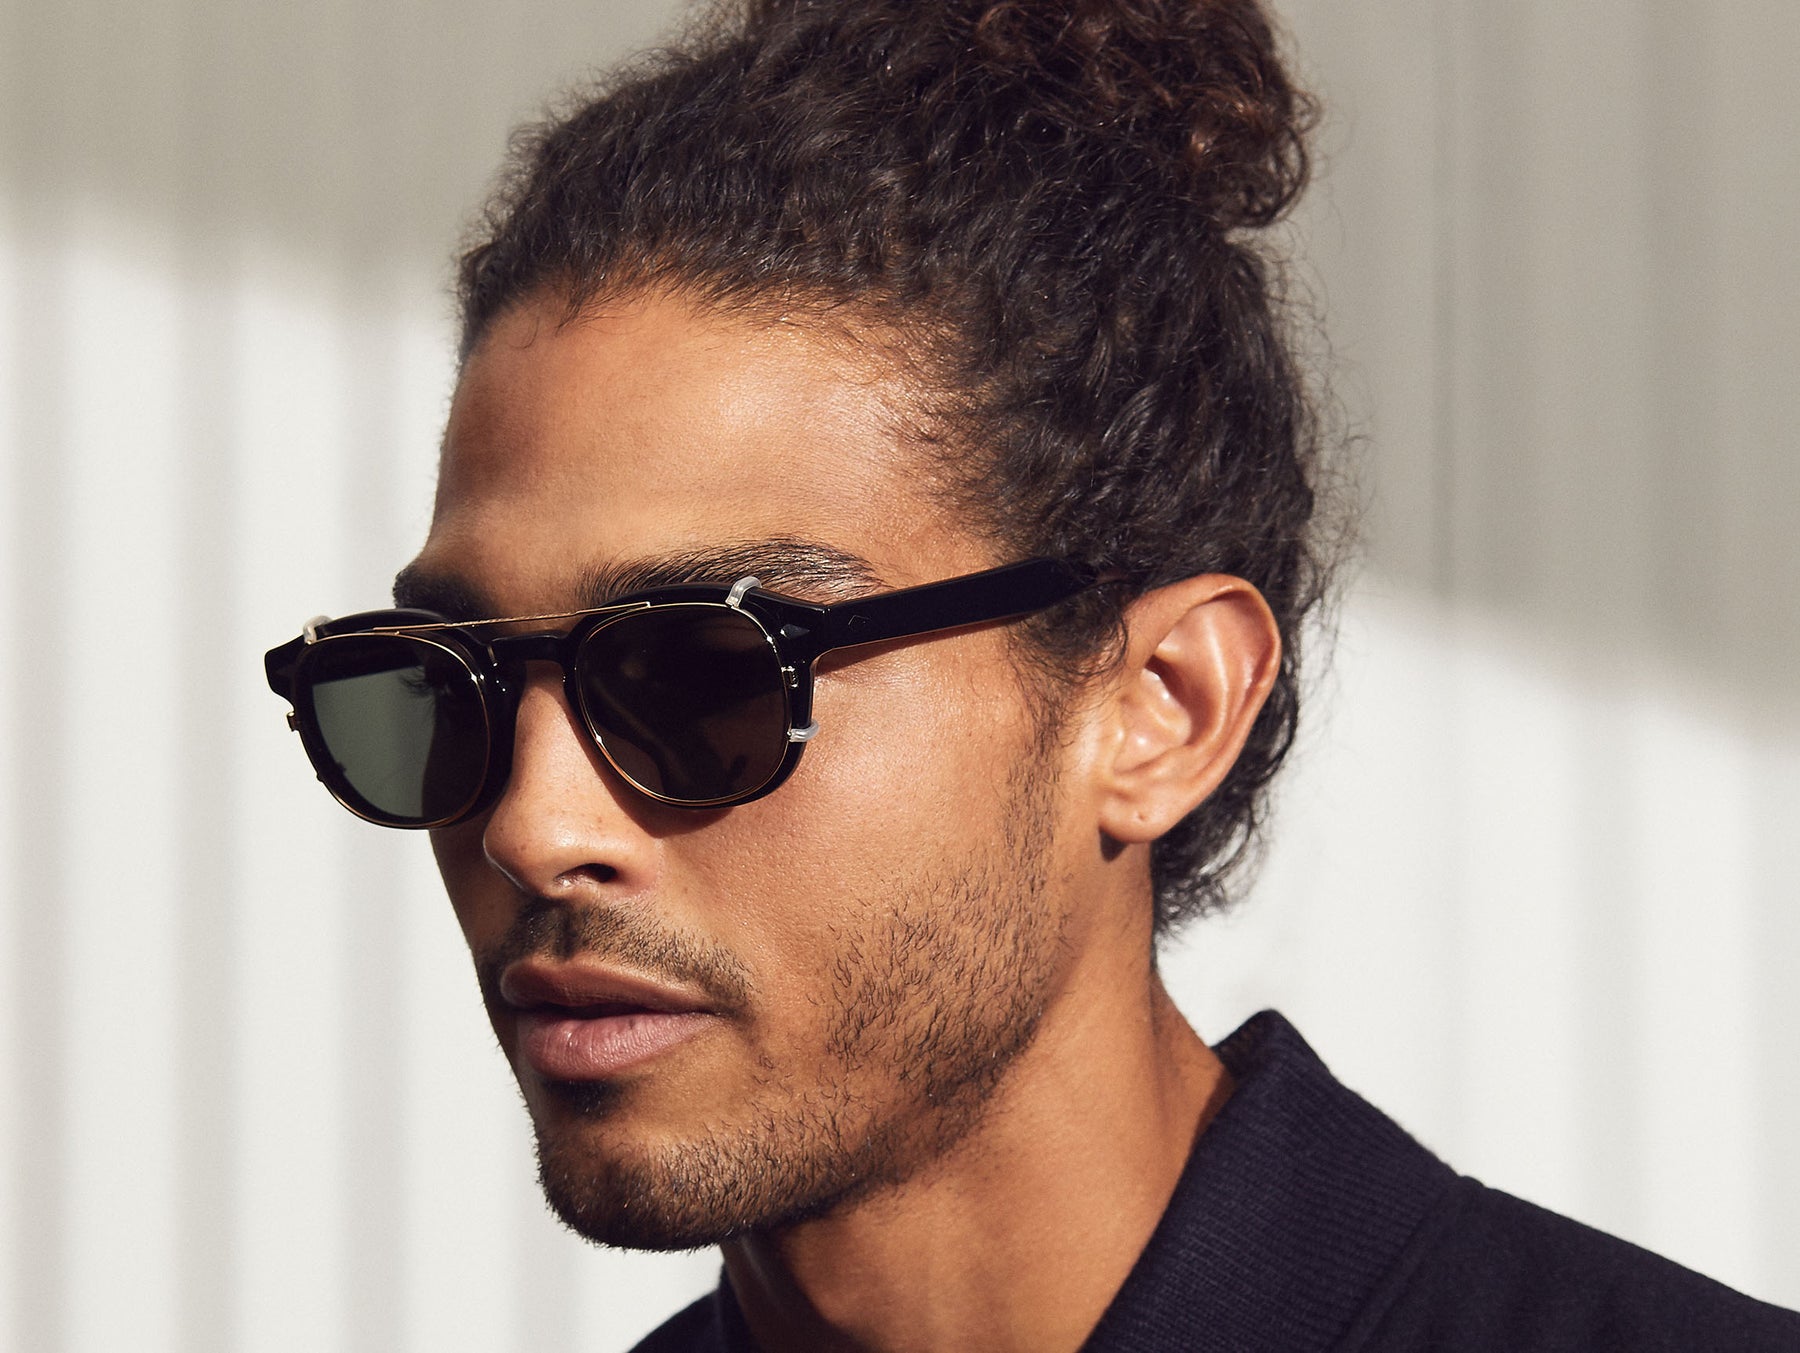 Model is wearing The CLIPTOSH POLARIZED in Gold in size 46 with G-15 lenses